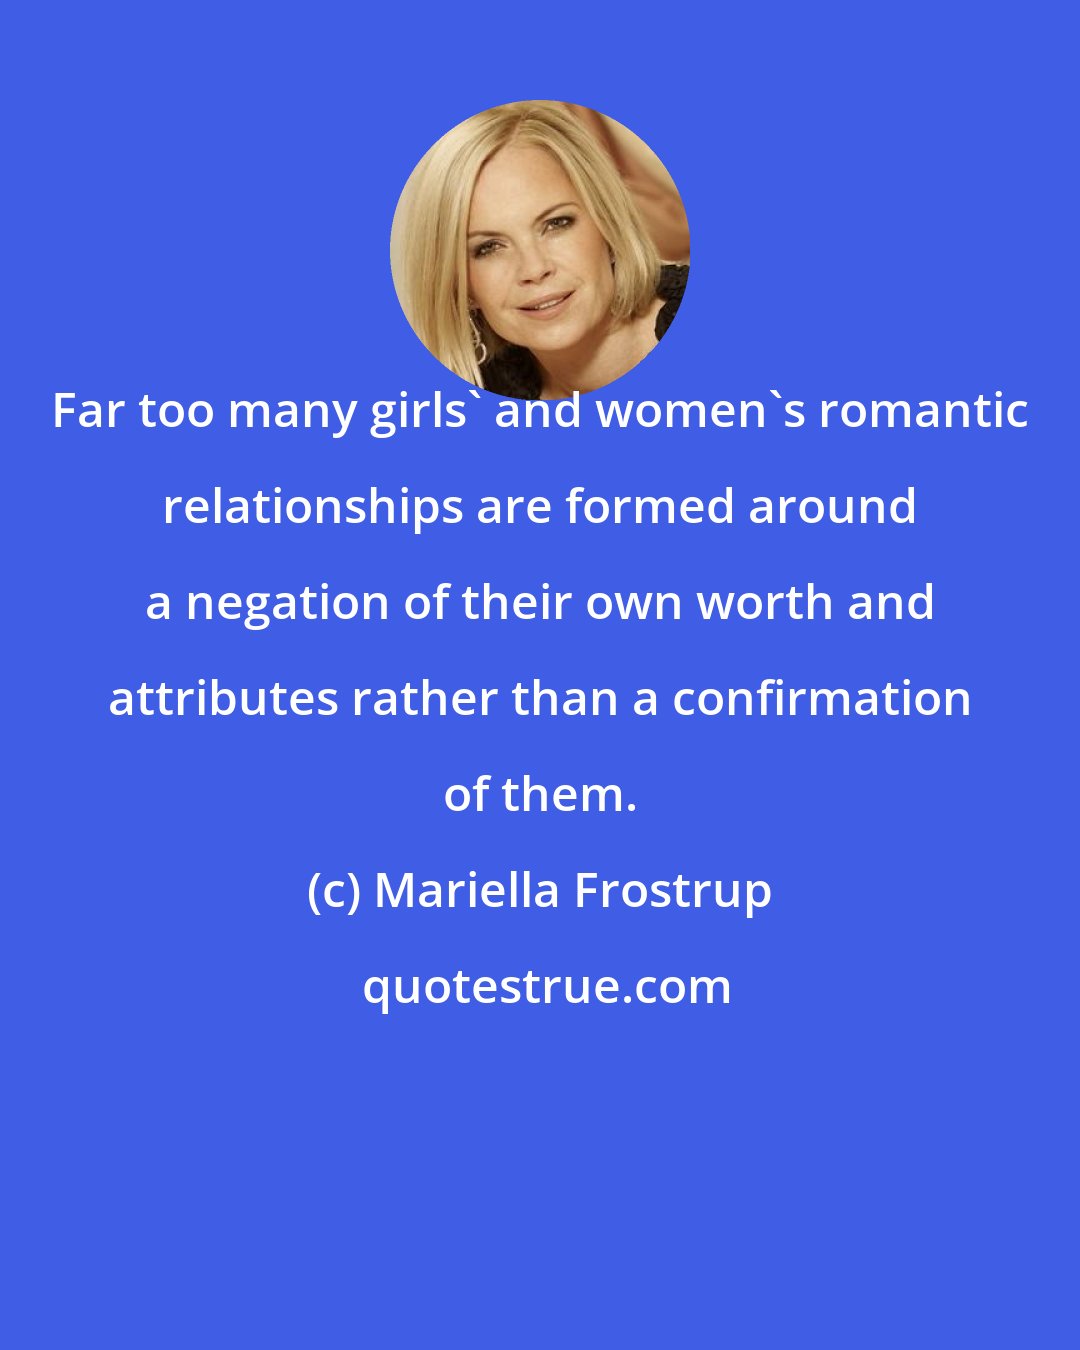 Mariella Frostrup: Far too many girls' and women's romantic relationships are formed around a negation of their own worth and attributes rather than a confirmation of them.